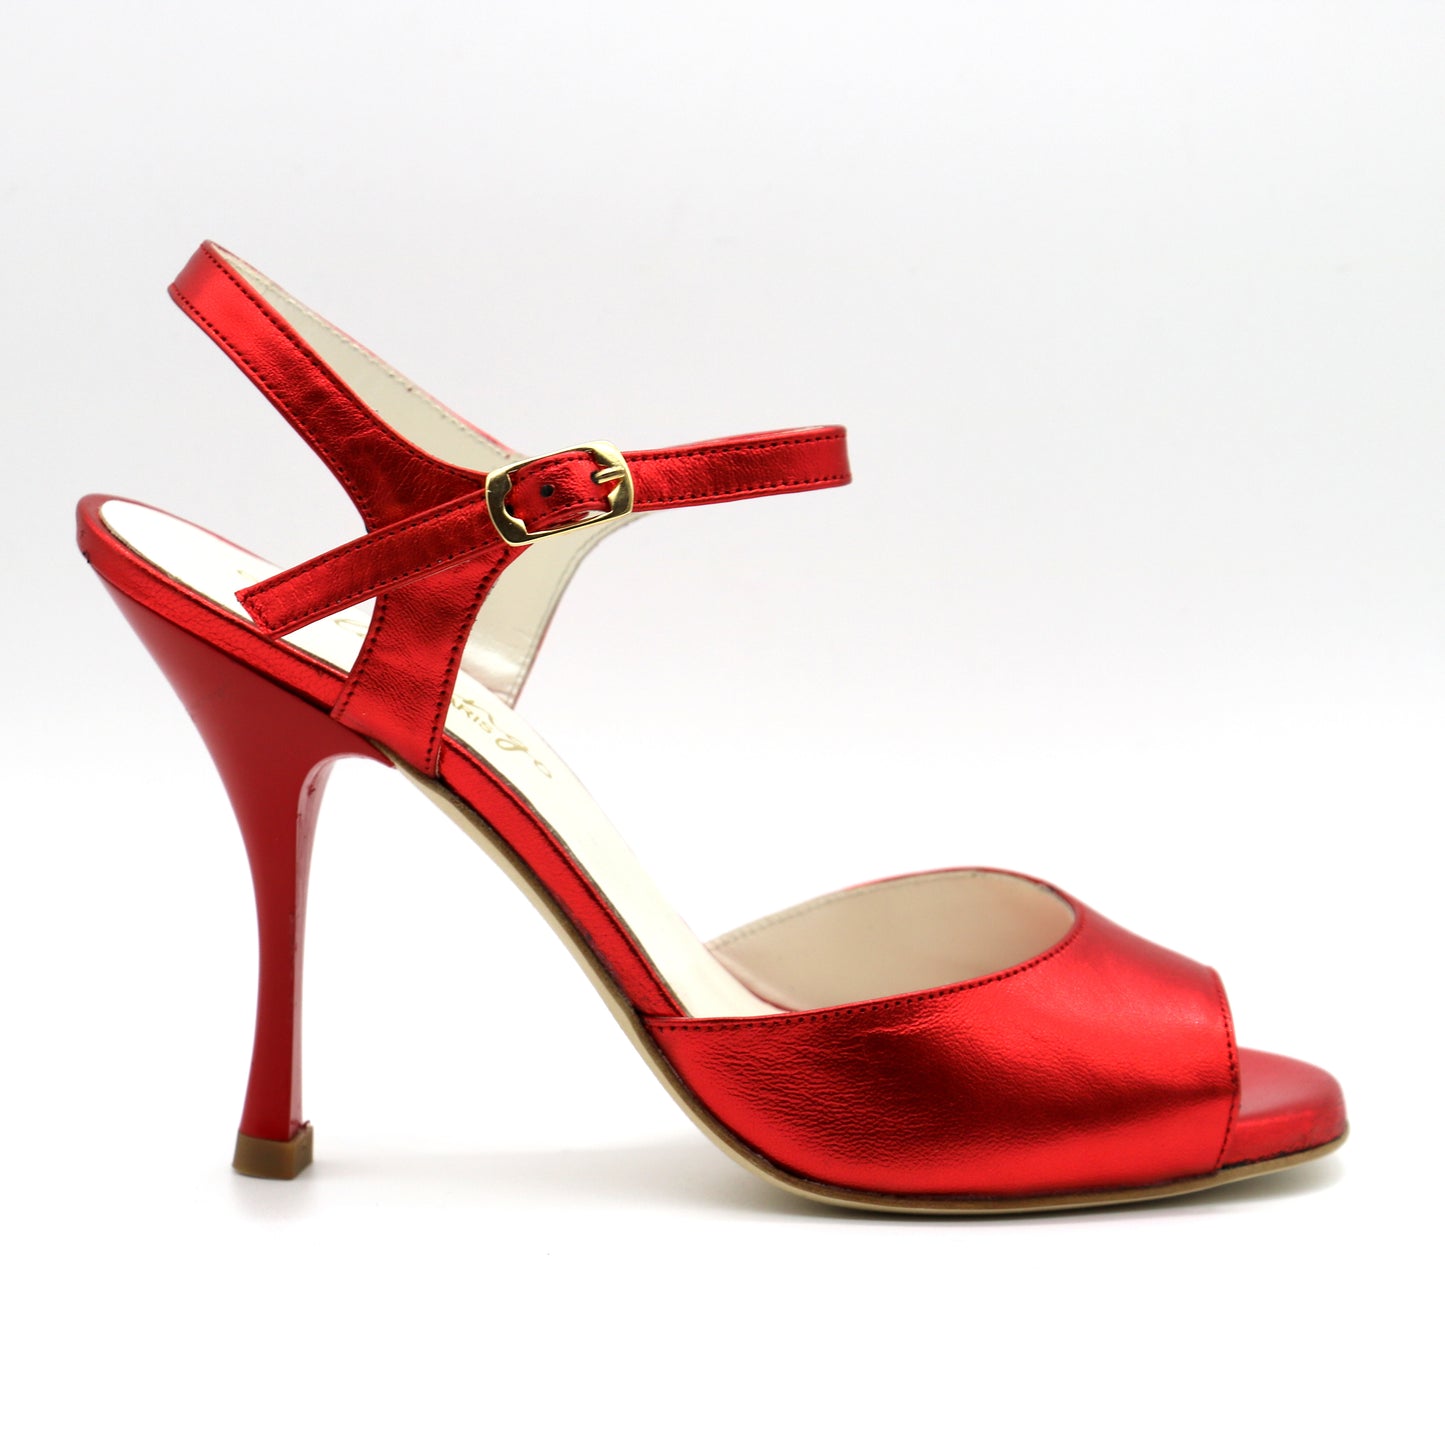 Uno shiny red, lacquered heel 9cm